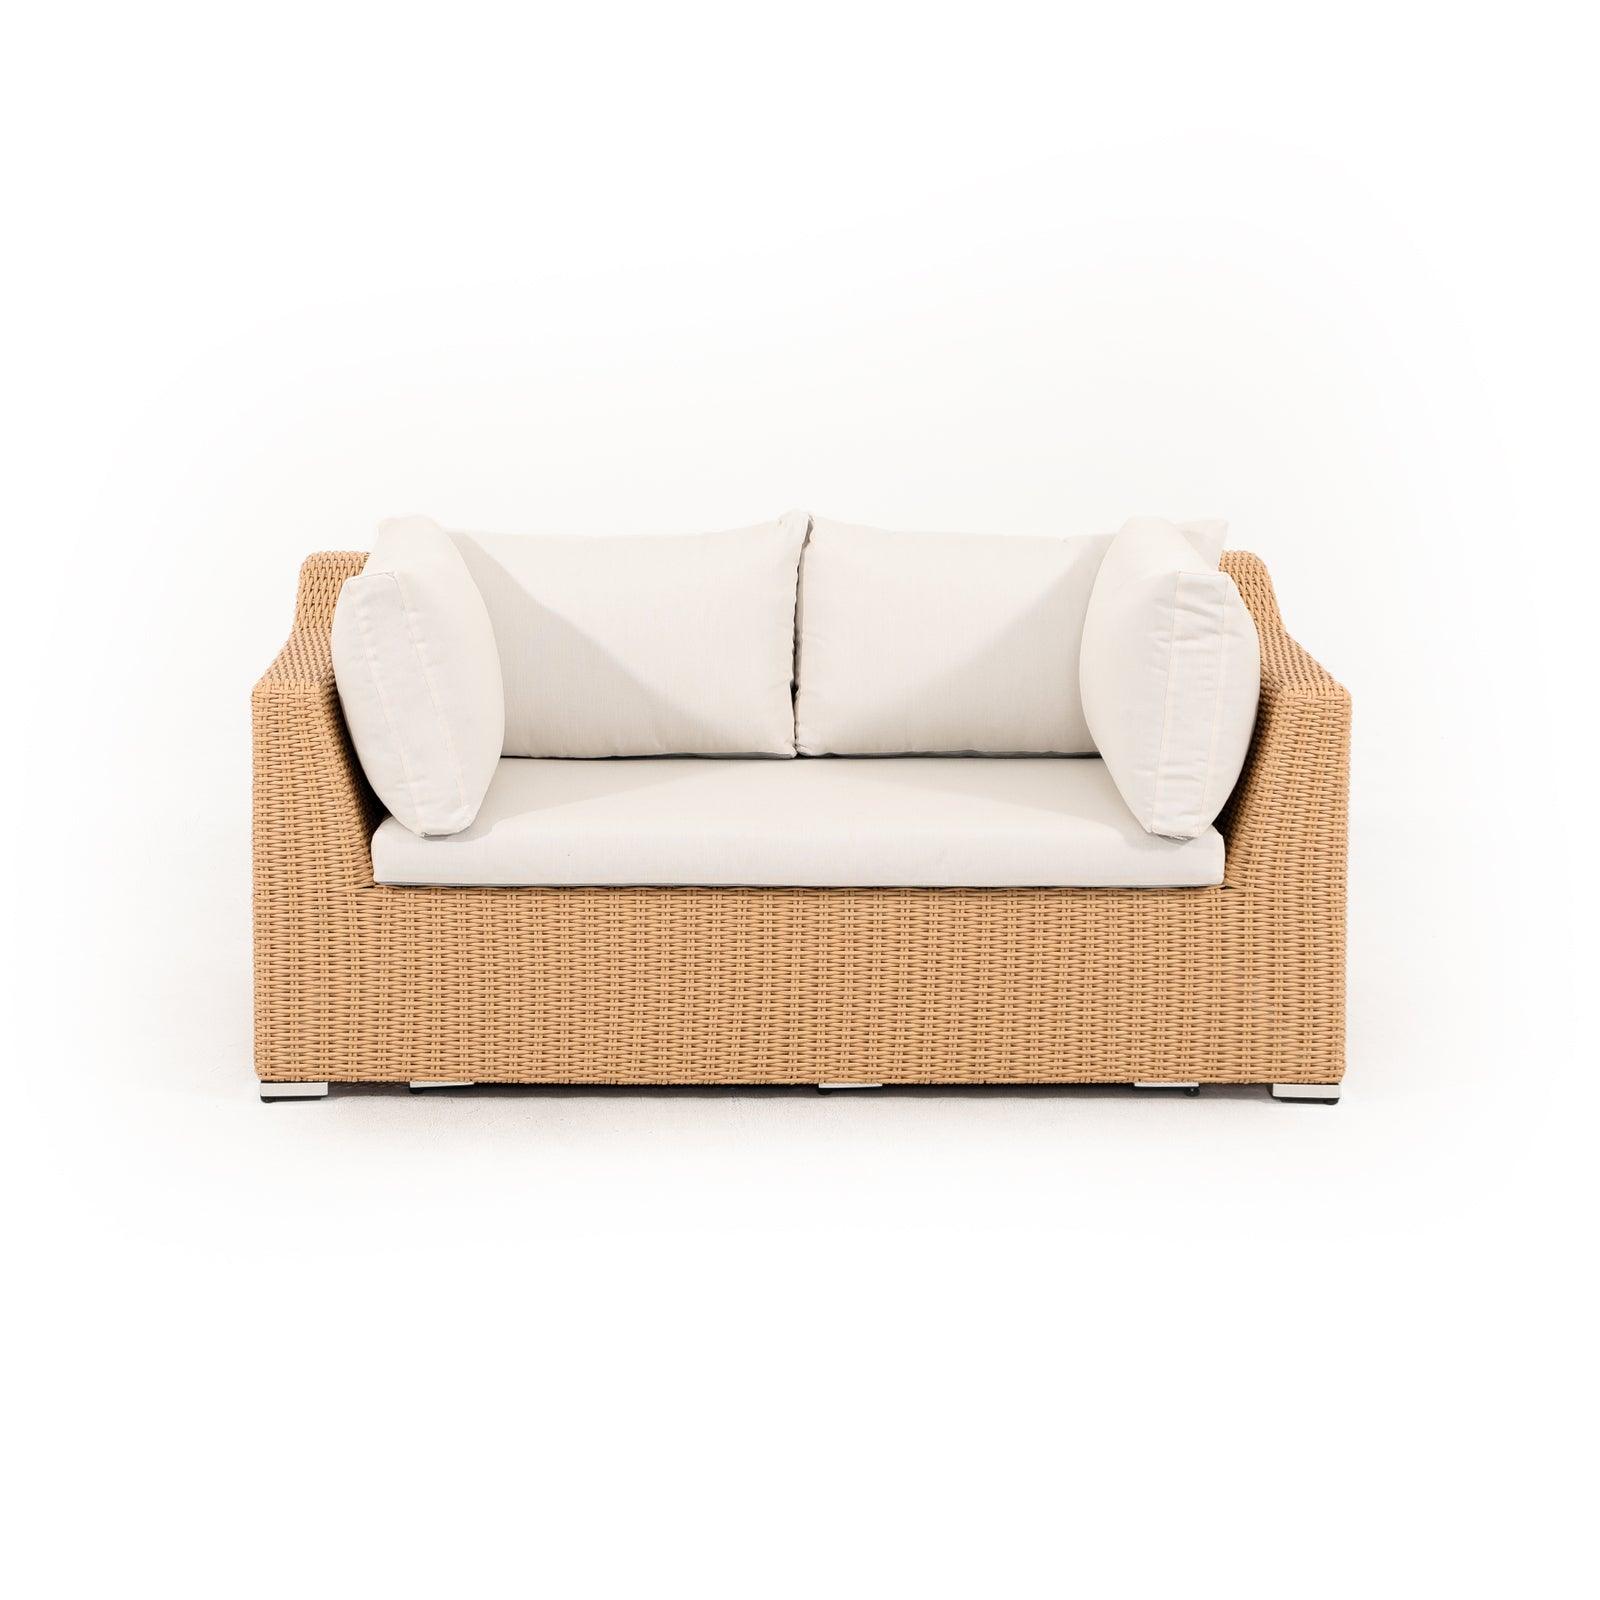 Elba natural color rattan outdoor loveseat with beige cushions, front - Jardina Furniture